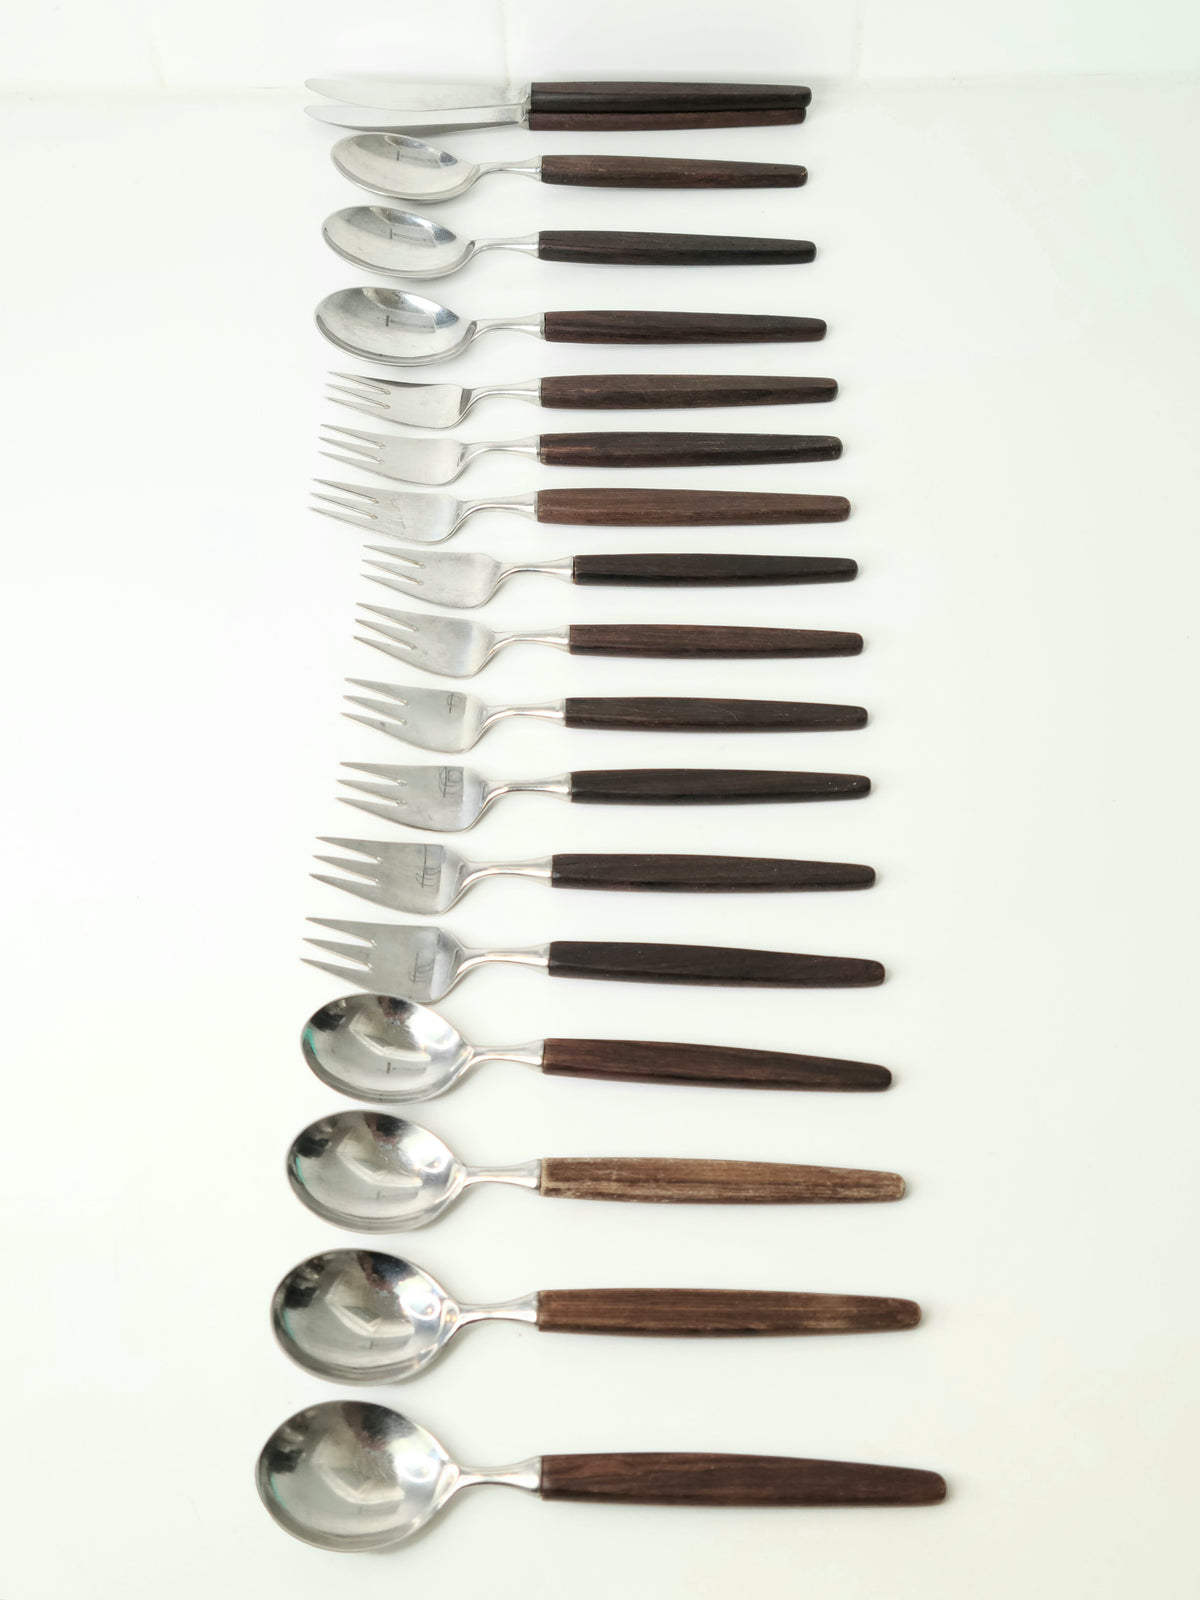 Tias Eckhoff Rosewood and Stainless Flatware